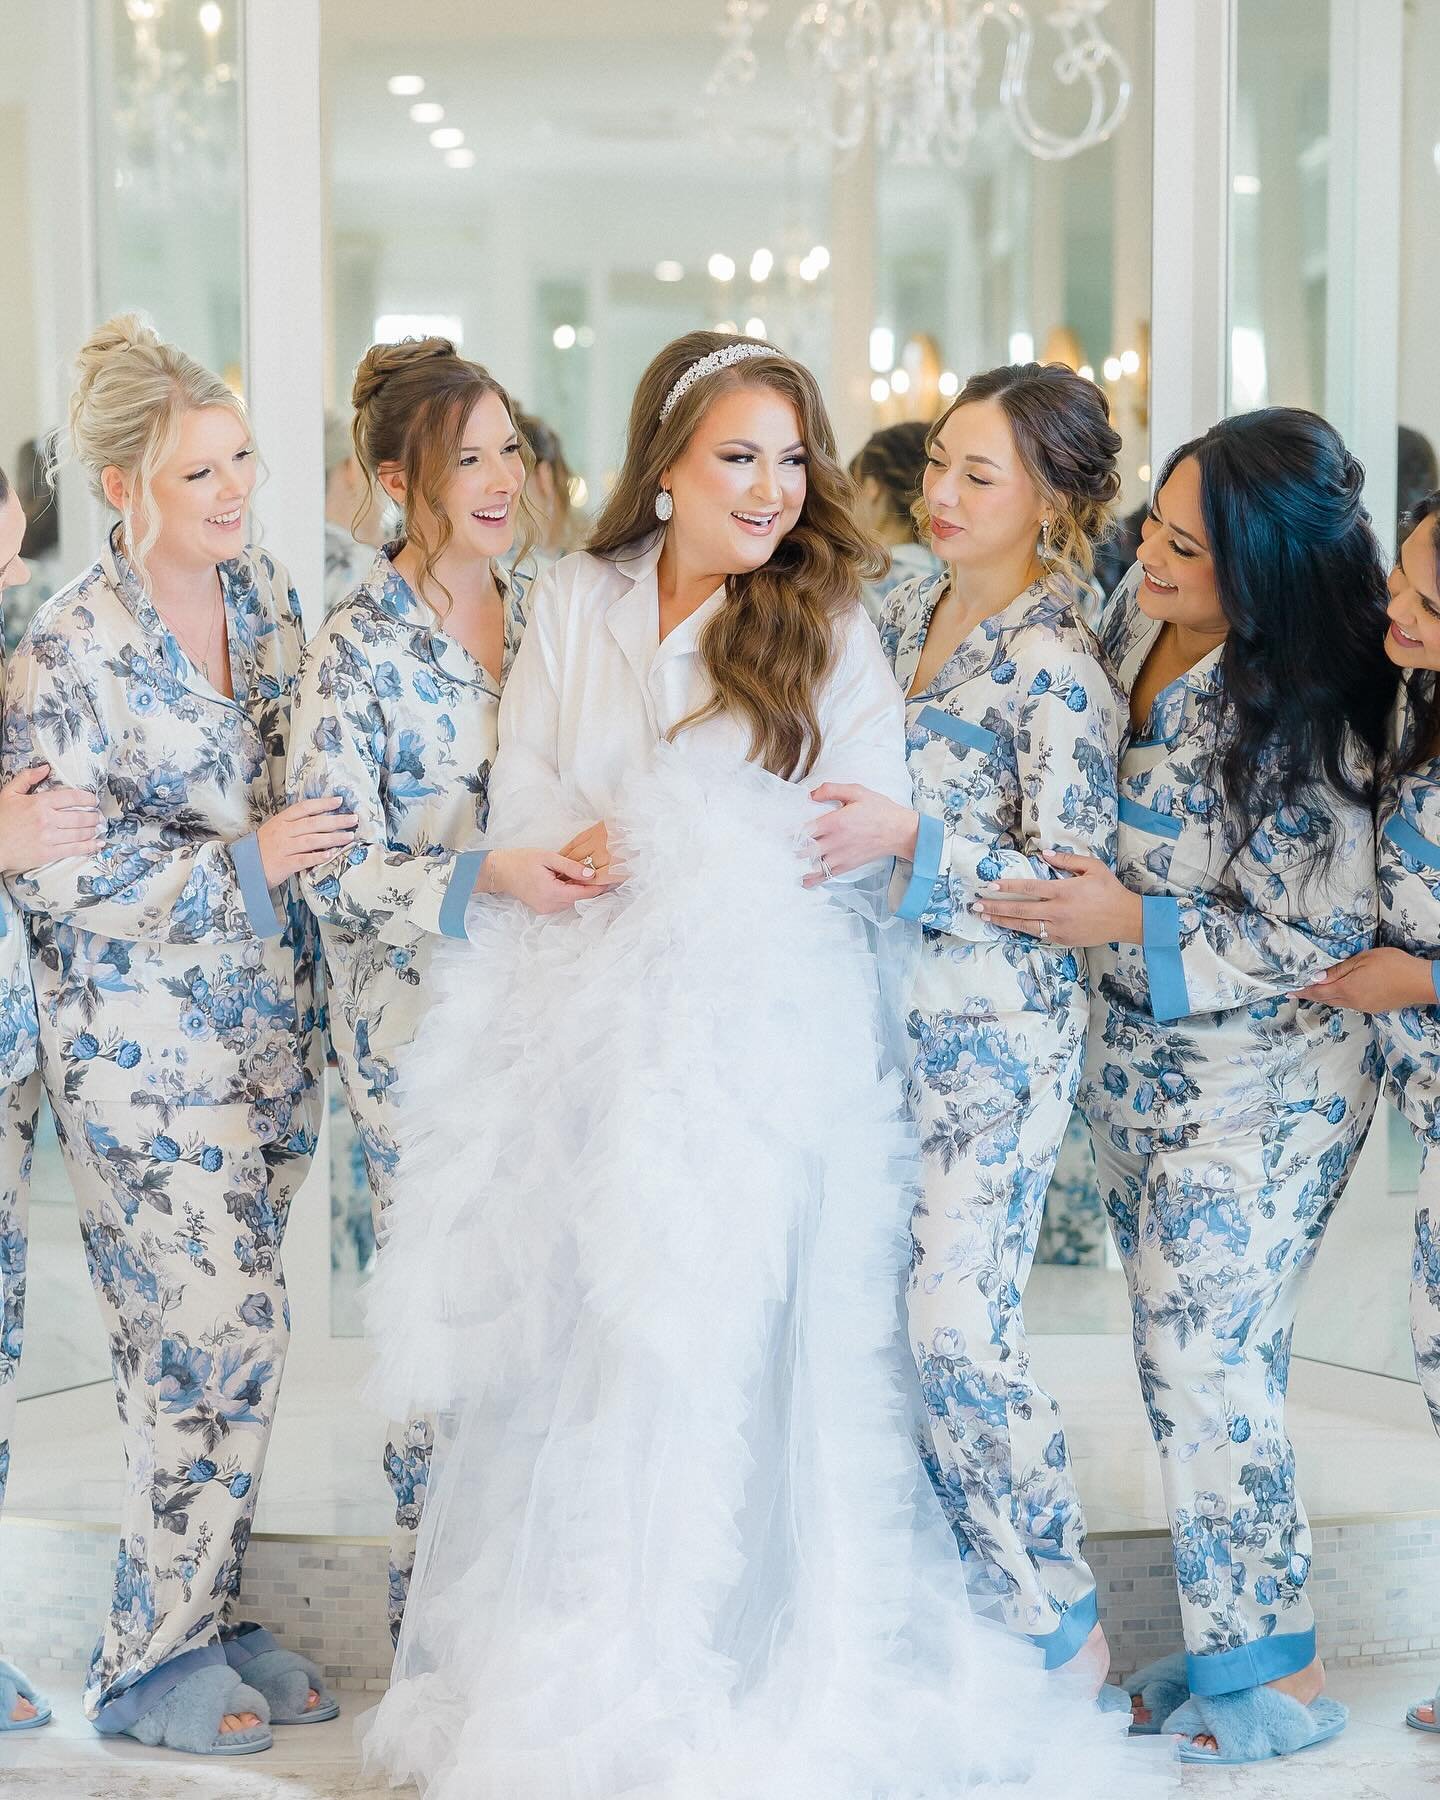 These sneak peaks from Brittany + Jonathan&rsquo;s wedding day have us swooning ☁️🩵

Venue | @thehillsideestatetx 
Planning | @turnthepaigeevents 
Photographer | @foxbelleweddings 
HAMU | @teasetopleasehairandmakeup

DFW Makeup, DFW Hair, Dallas Mak